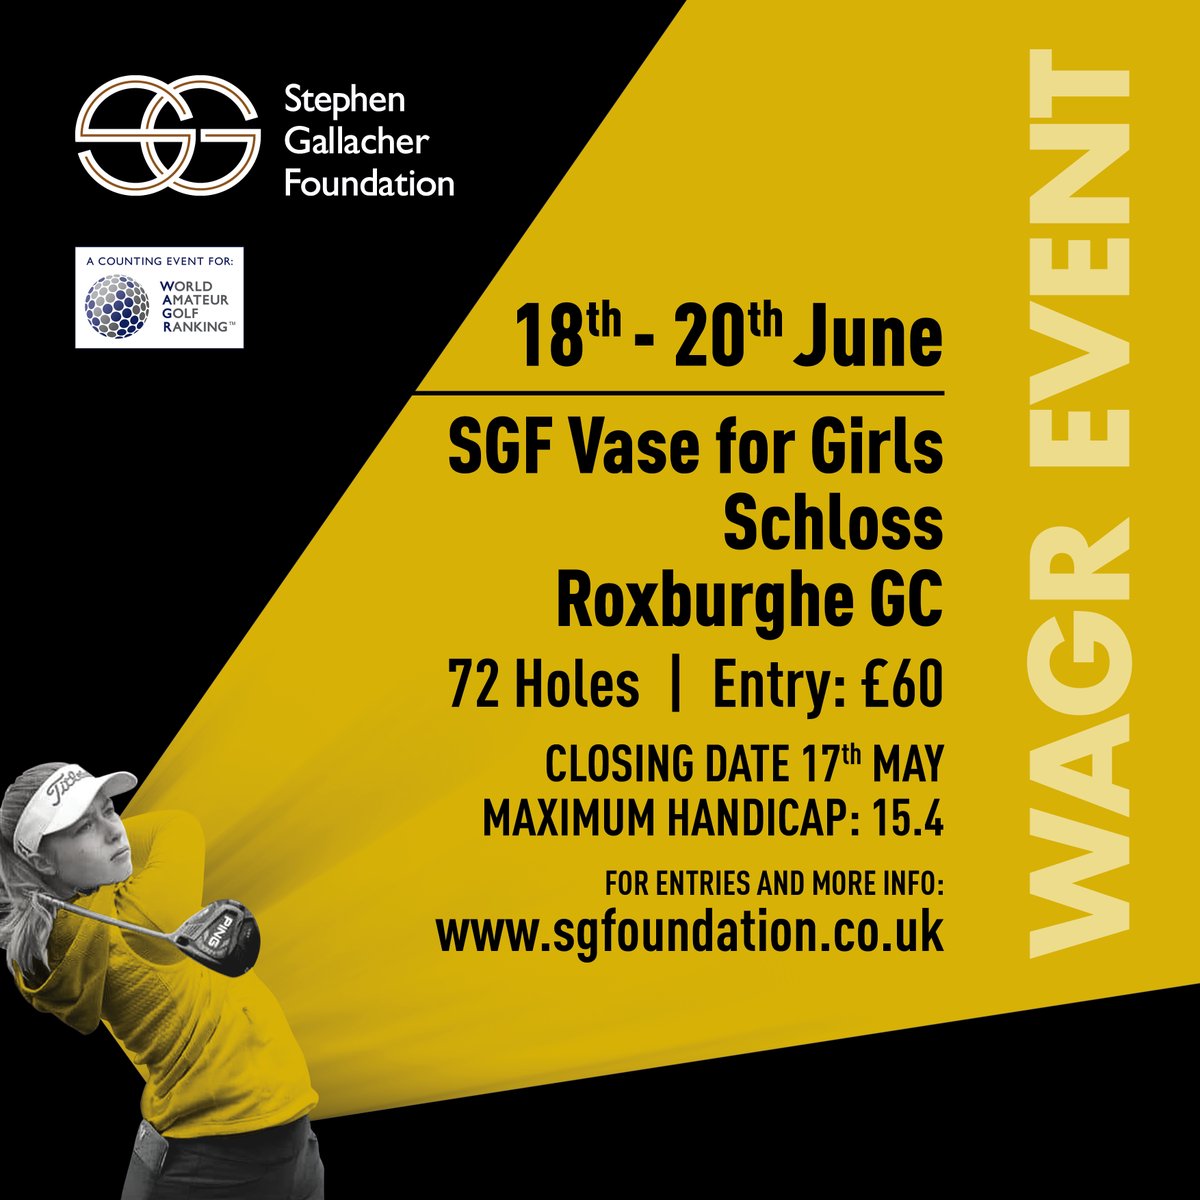 Our flagship 'OPEN' events the SGF Trophy & Vase @The_Roxburghe are nearly upon us These events are counting towards @ScottishGolf WAGR and EGR Rankings along with the @TelegraphJunior CLOSING DATES ARE 17TH MAY sgfoundation.co.uk @stevieggolf @ScottishGolf @GolfBible